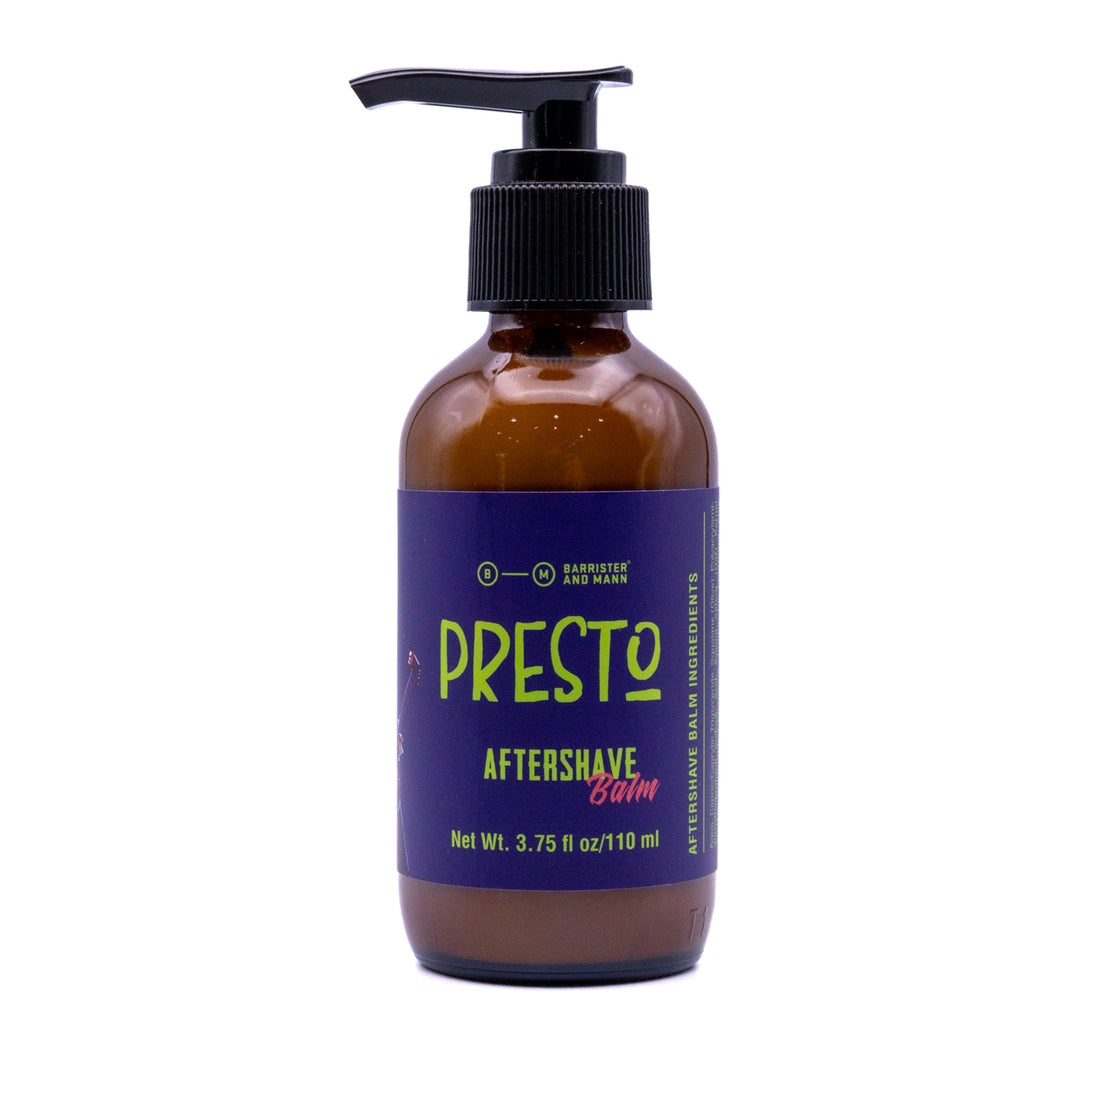 Presto Aftershave Balm - Barrister and Mann LLC